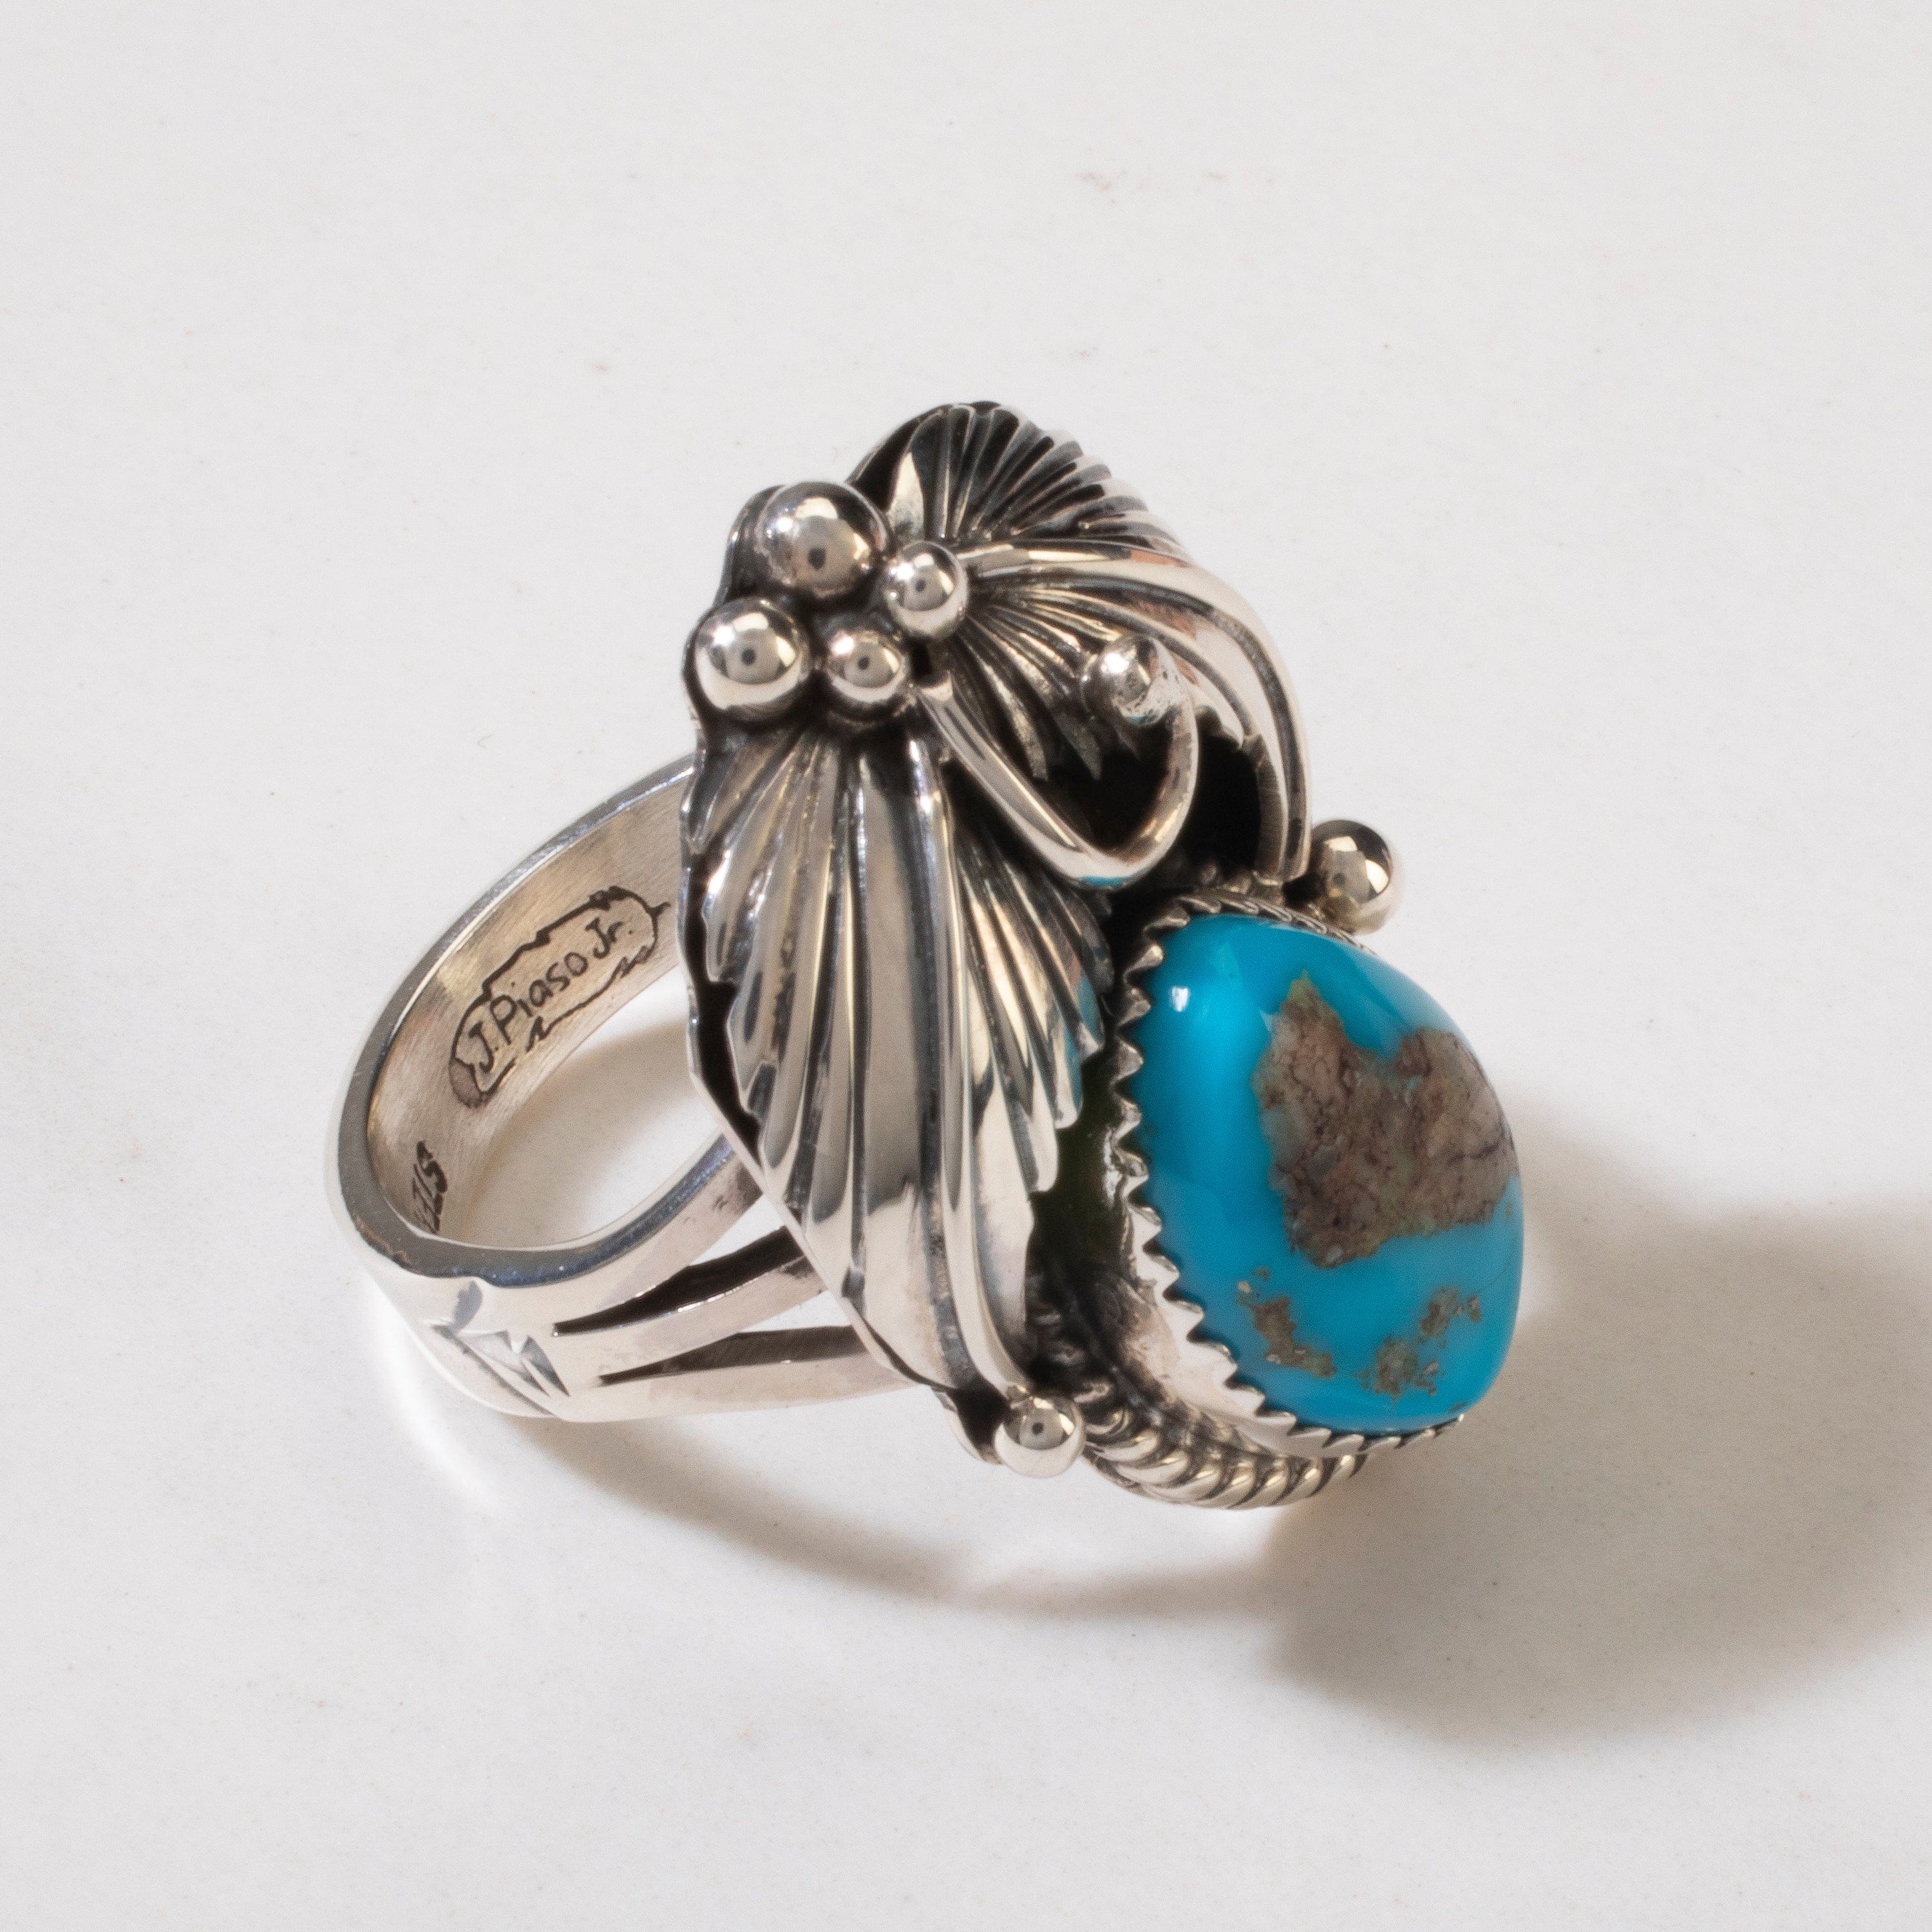 Kalifano Native American Jewelry 8 Joe Piaso Jr. Sleeping Beauty Turquoise Feather Navajo USA Native American Made 925 Sterling Silver Ring NAR600.080.8